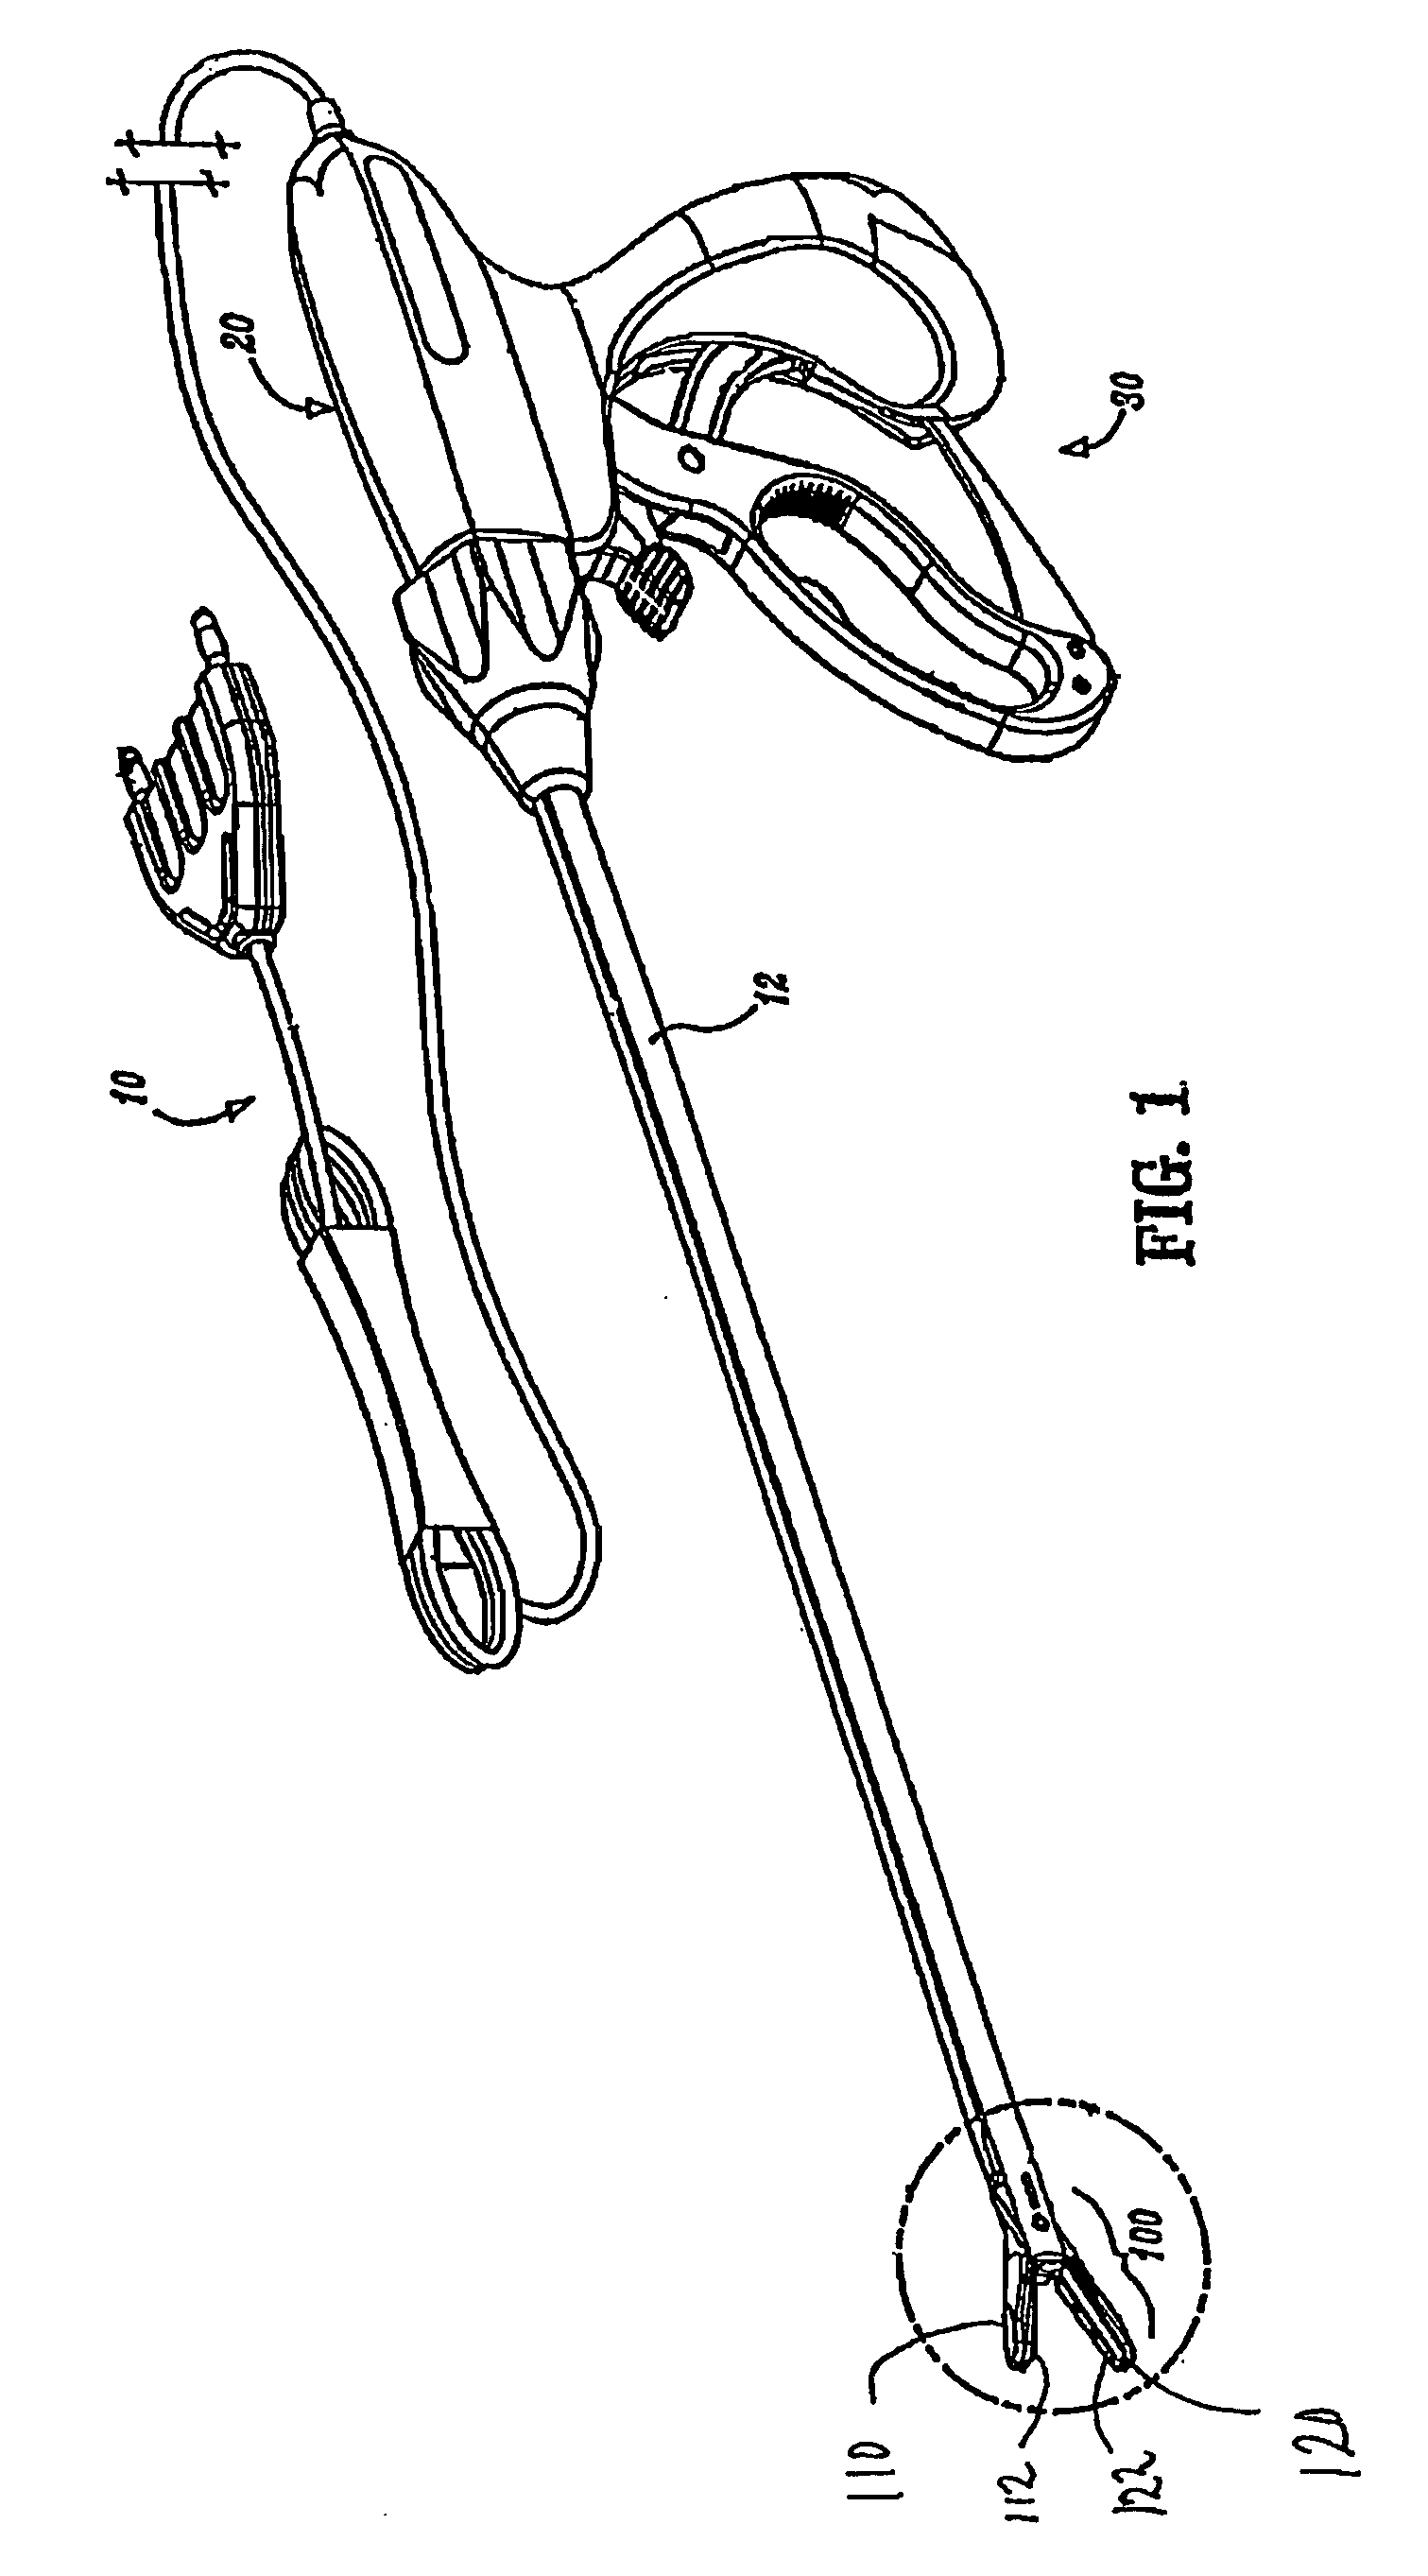 Non-stick surface coated electrodes and method for manufacturing same